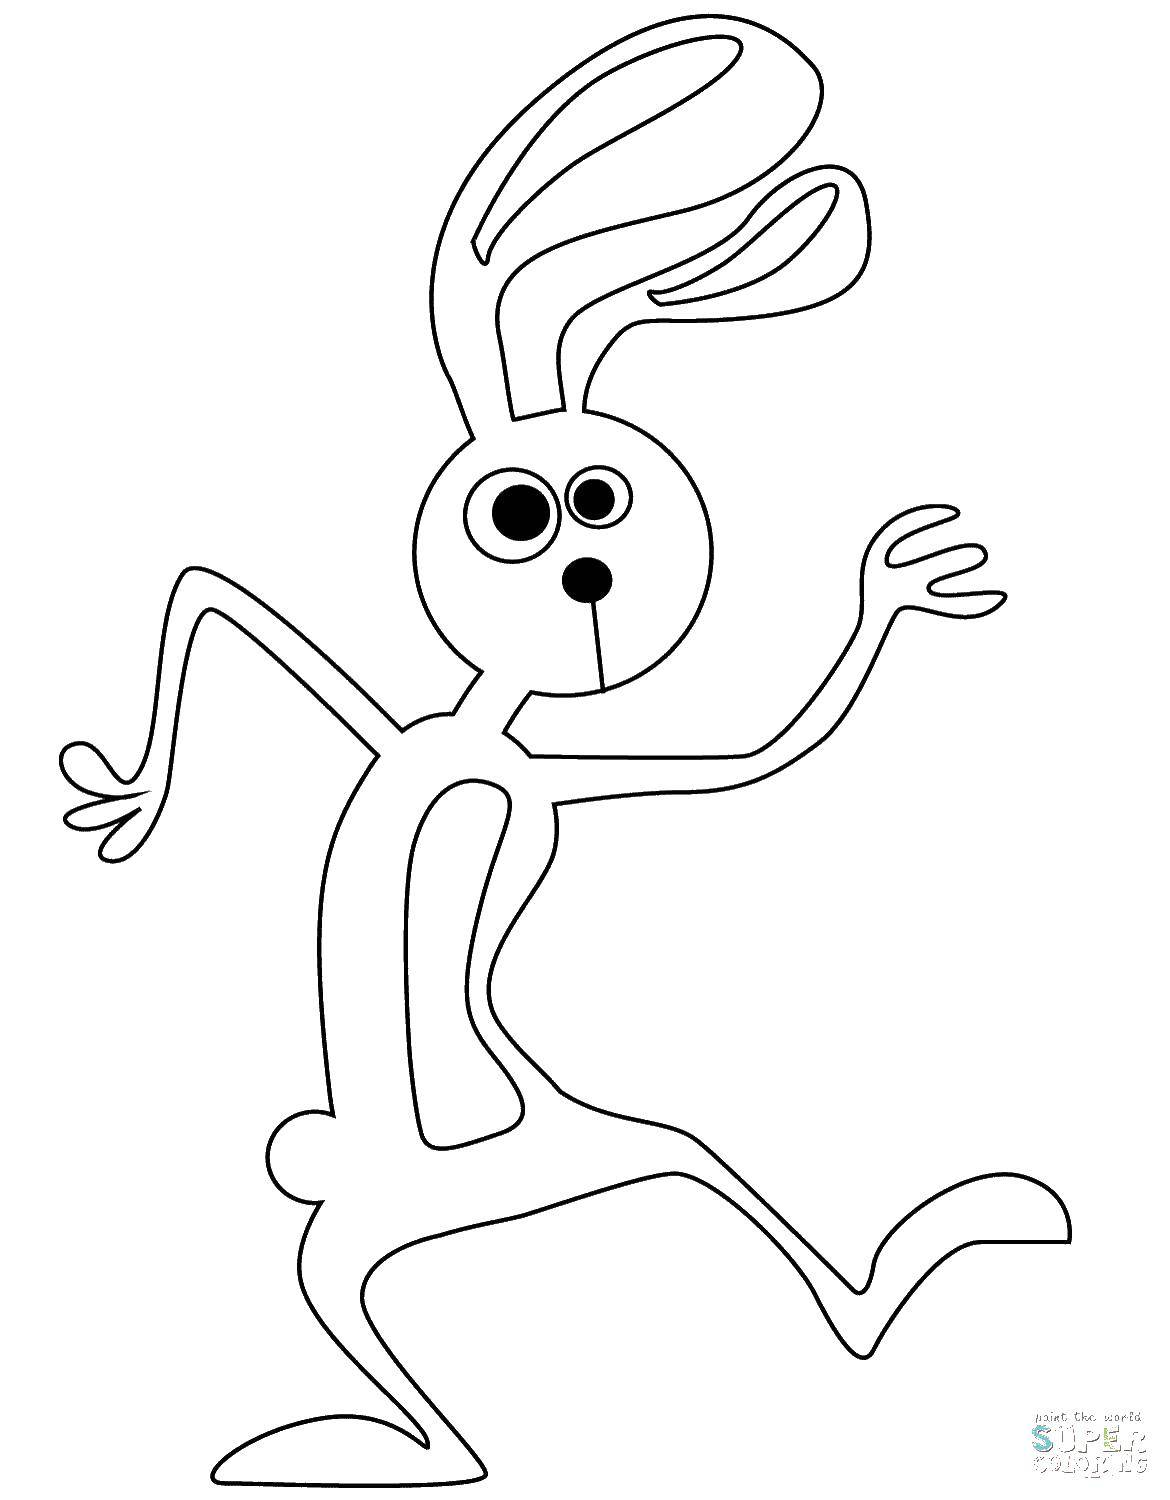 Coloring Skinny rabbit. Category the rabbit. Tags:  rabbit, hare.